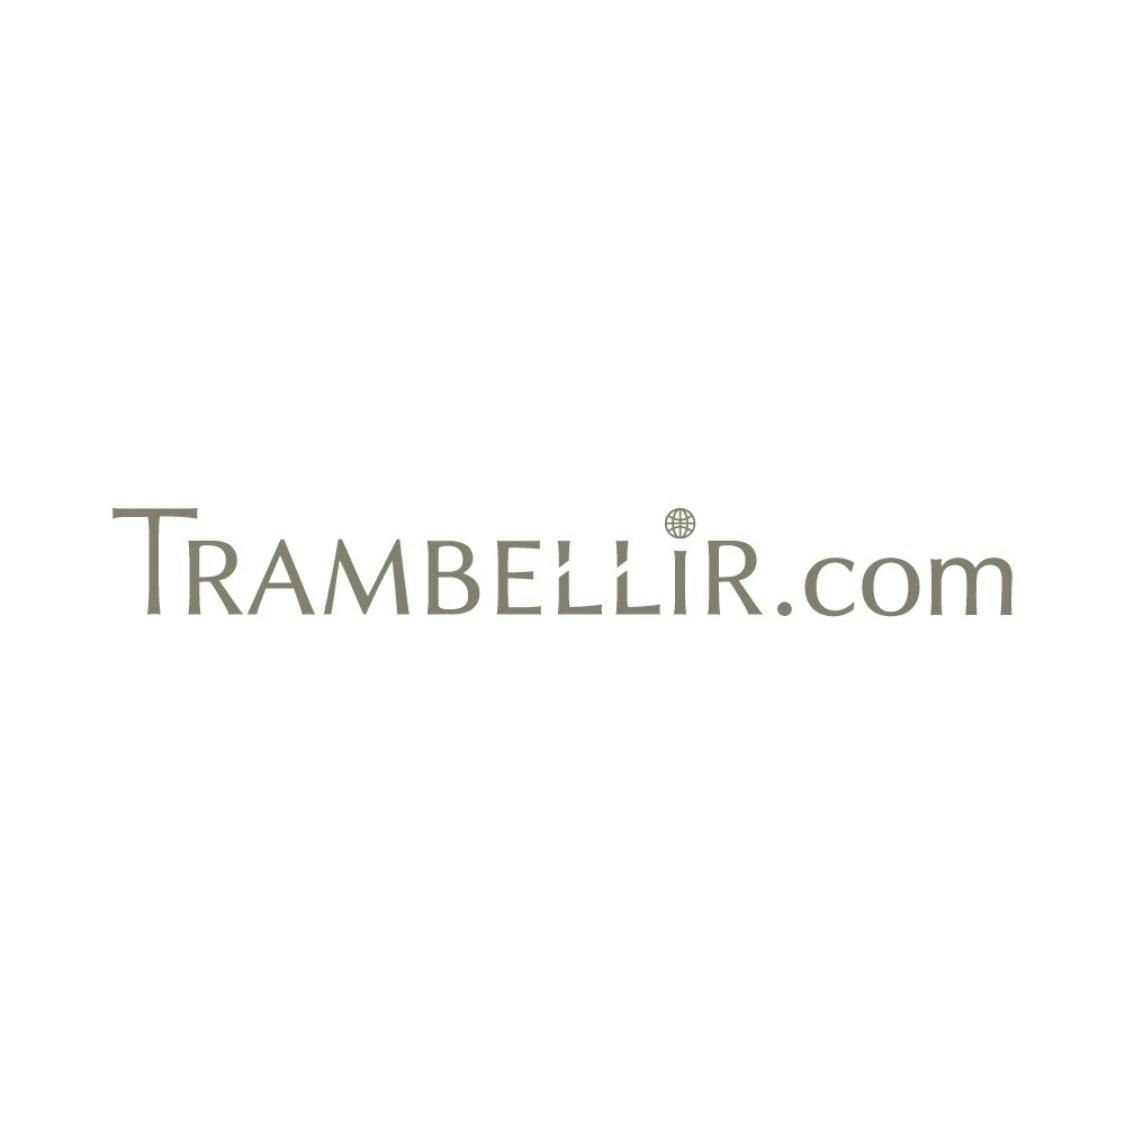 /startup-interview-with-so-iizuka-trambellirs-co-founder-and-ceo feature image